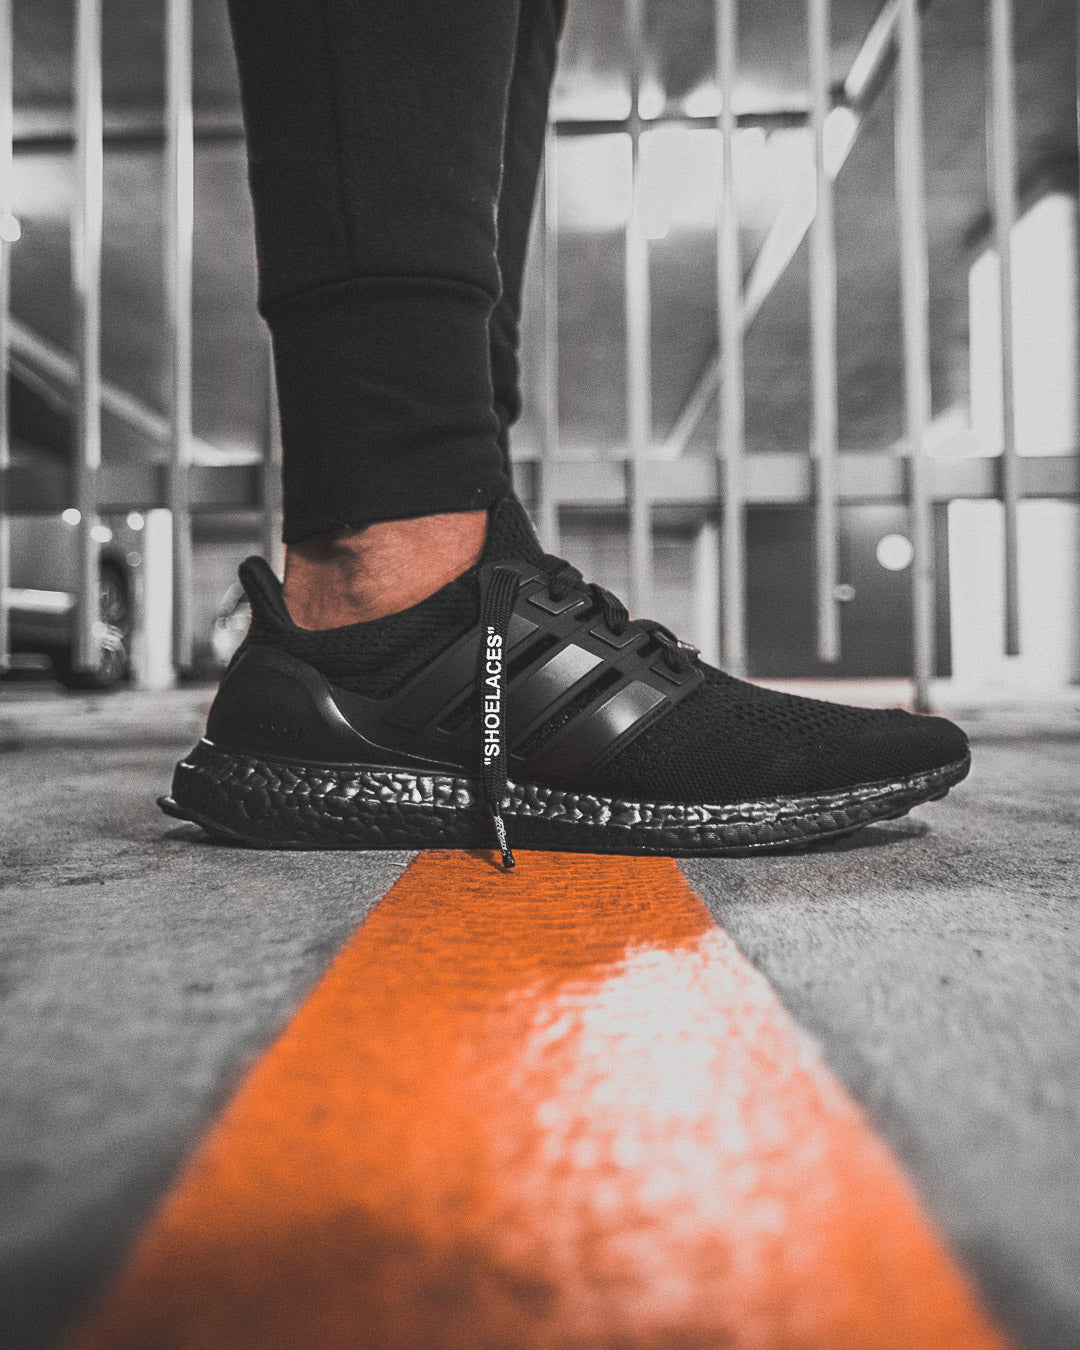 Black - SHOELACES inspired by OFF-WHITE x Nike- Flat Laces